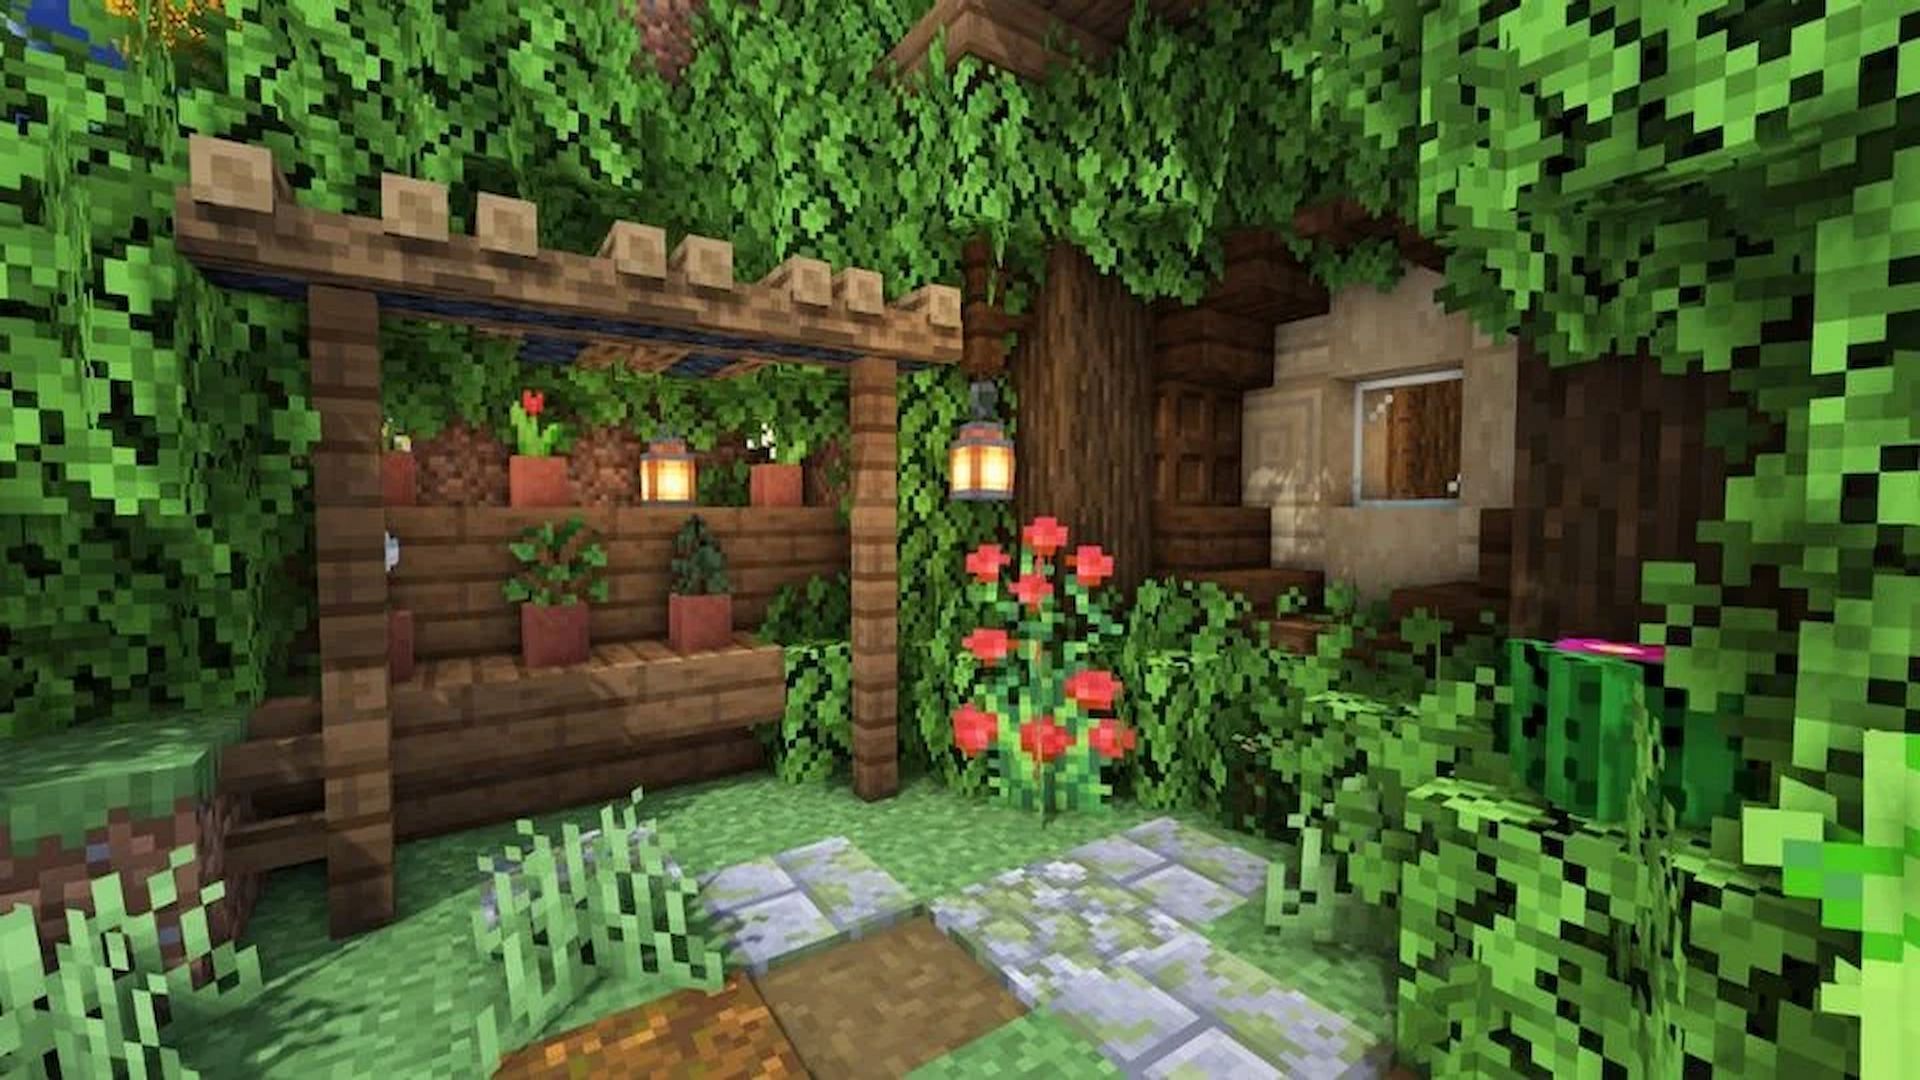 Players can create a tranquil garden to melt away their worries in Minecraft (Image via u/Meow_Craft/Reddit)